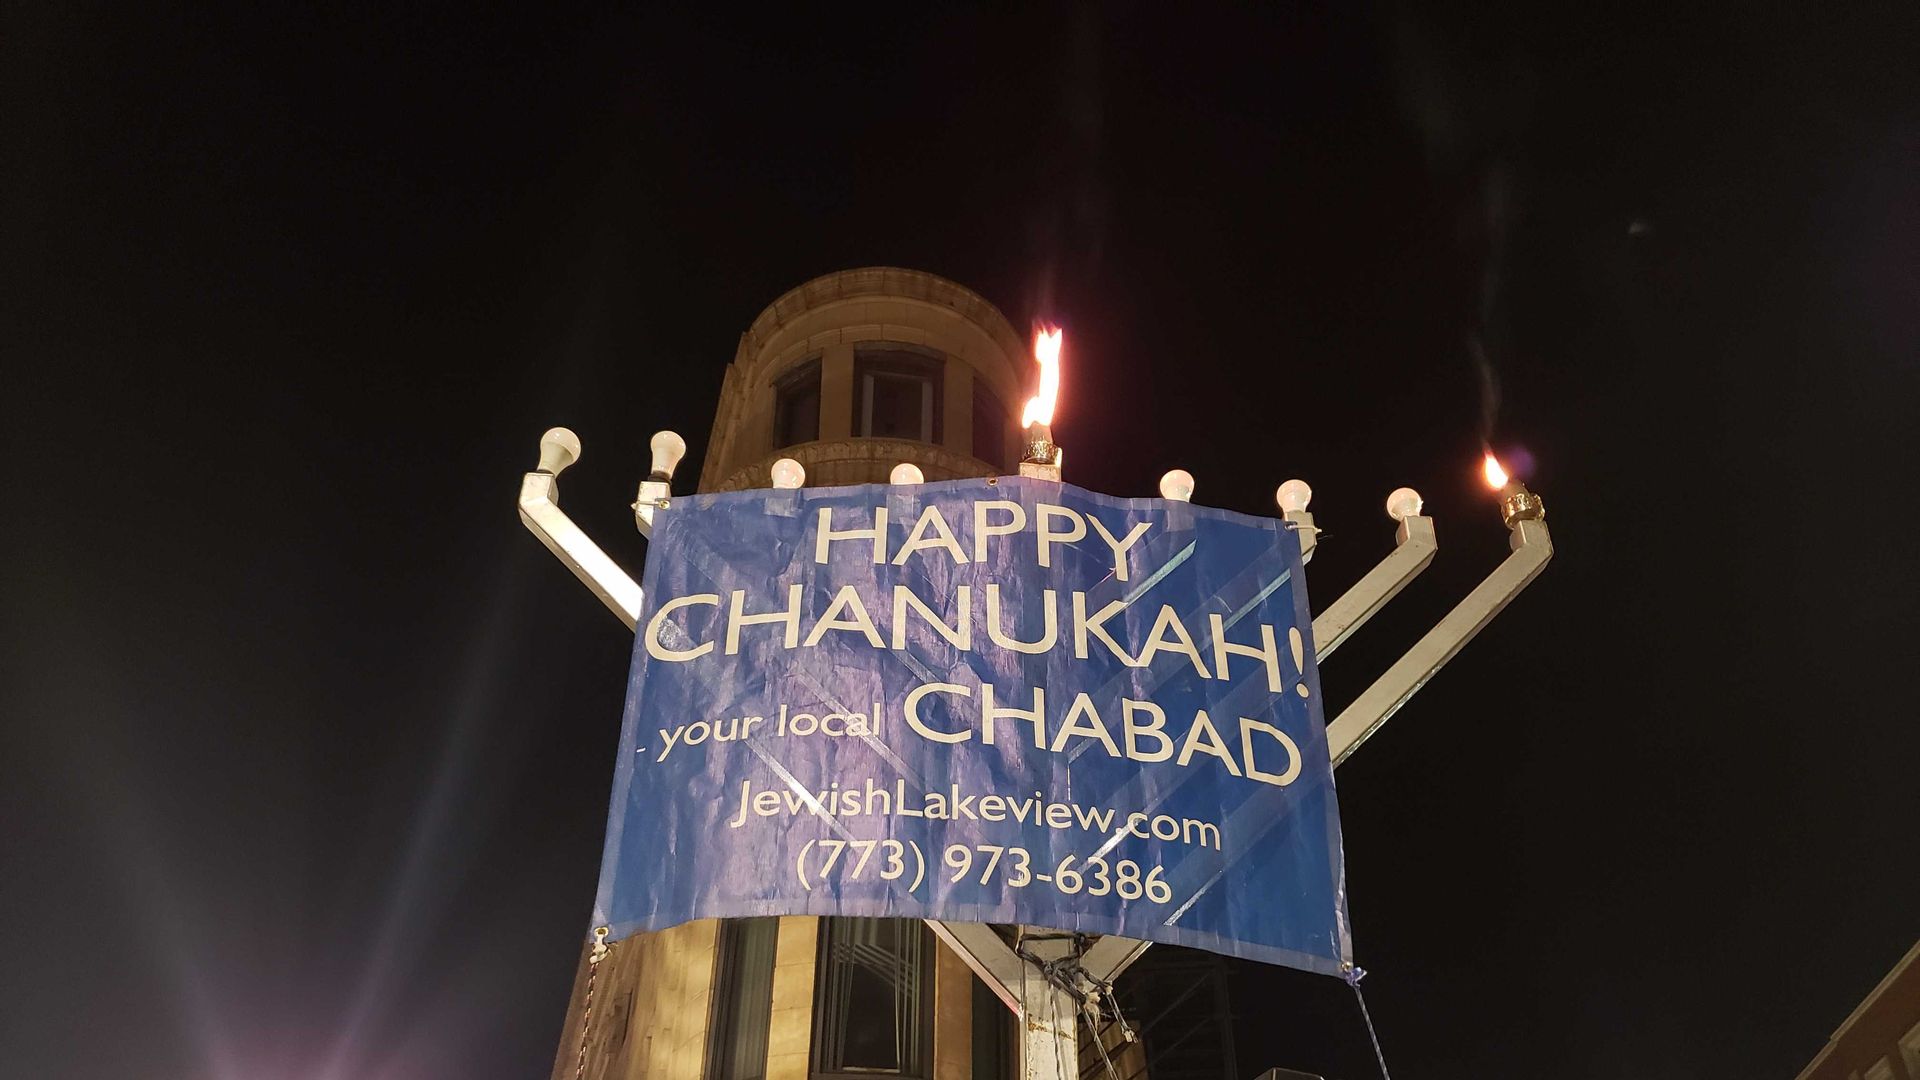 Lakeview and other communities around Chicago celebrated the first night of Hanukkah with public menorah lightings.